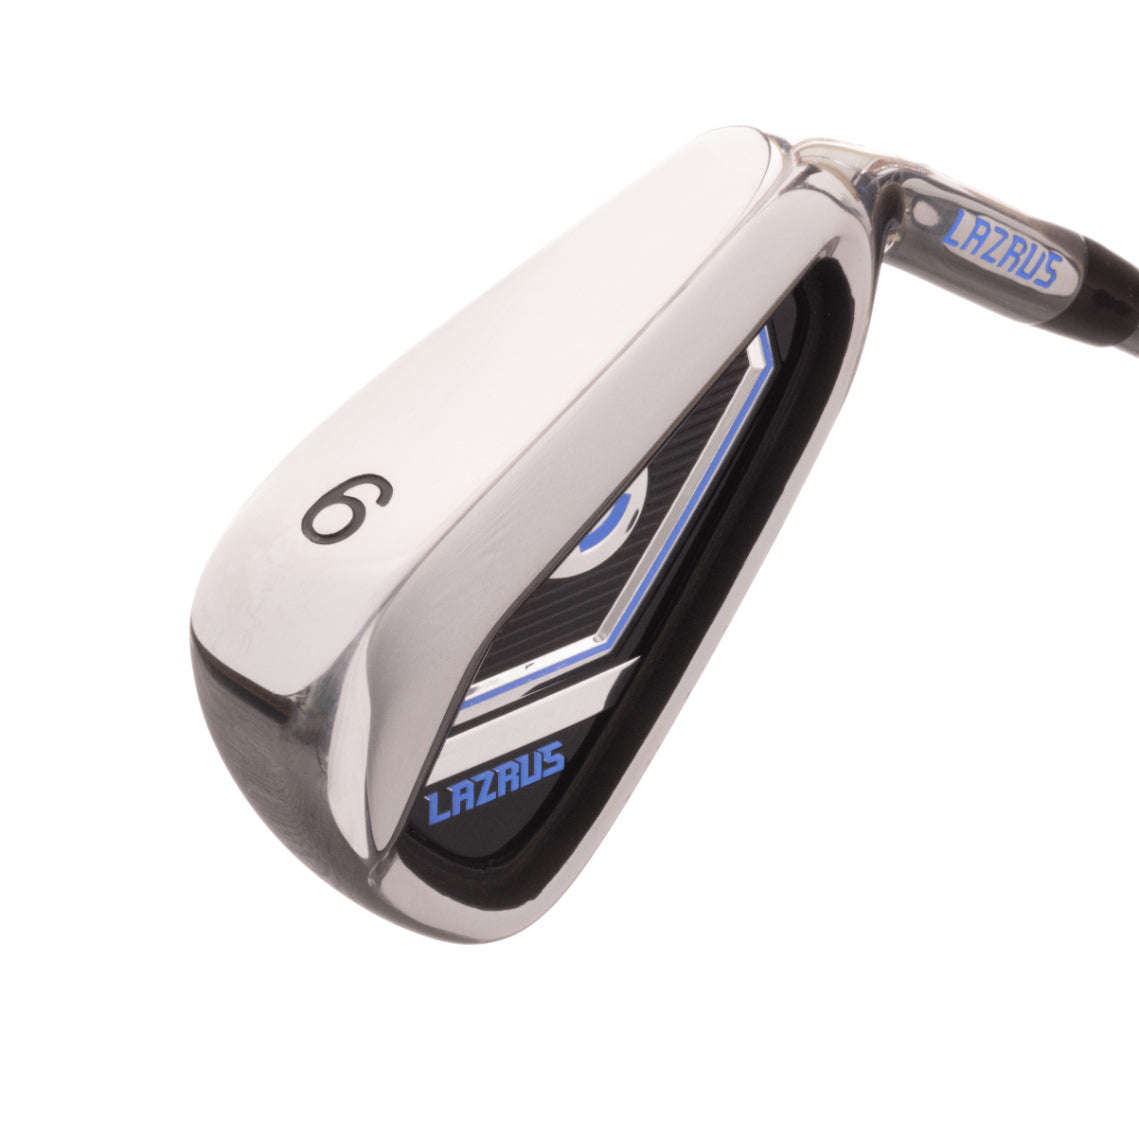 Lazrus Golf Irons Sets Right & Left Handed